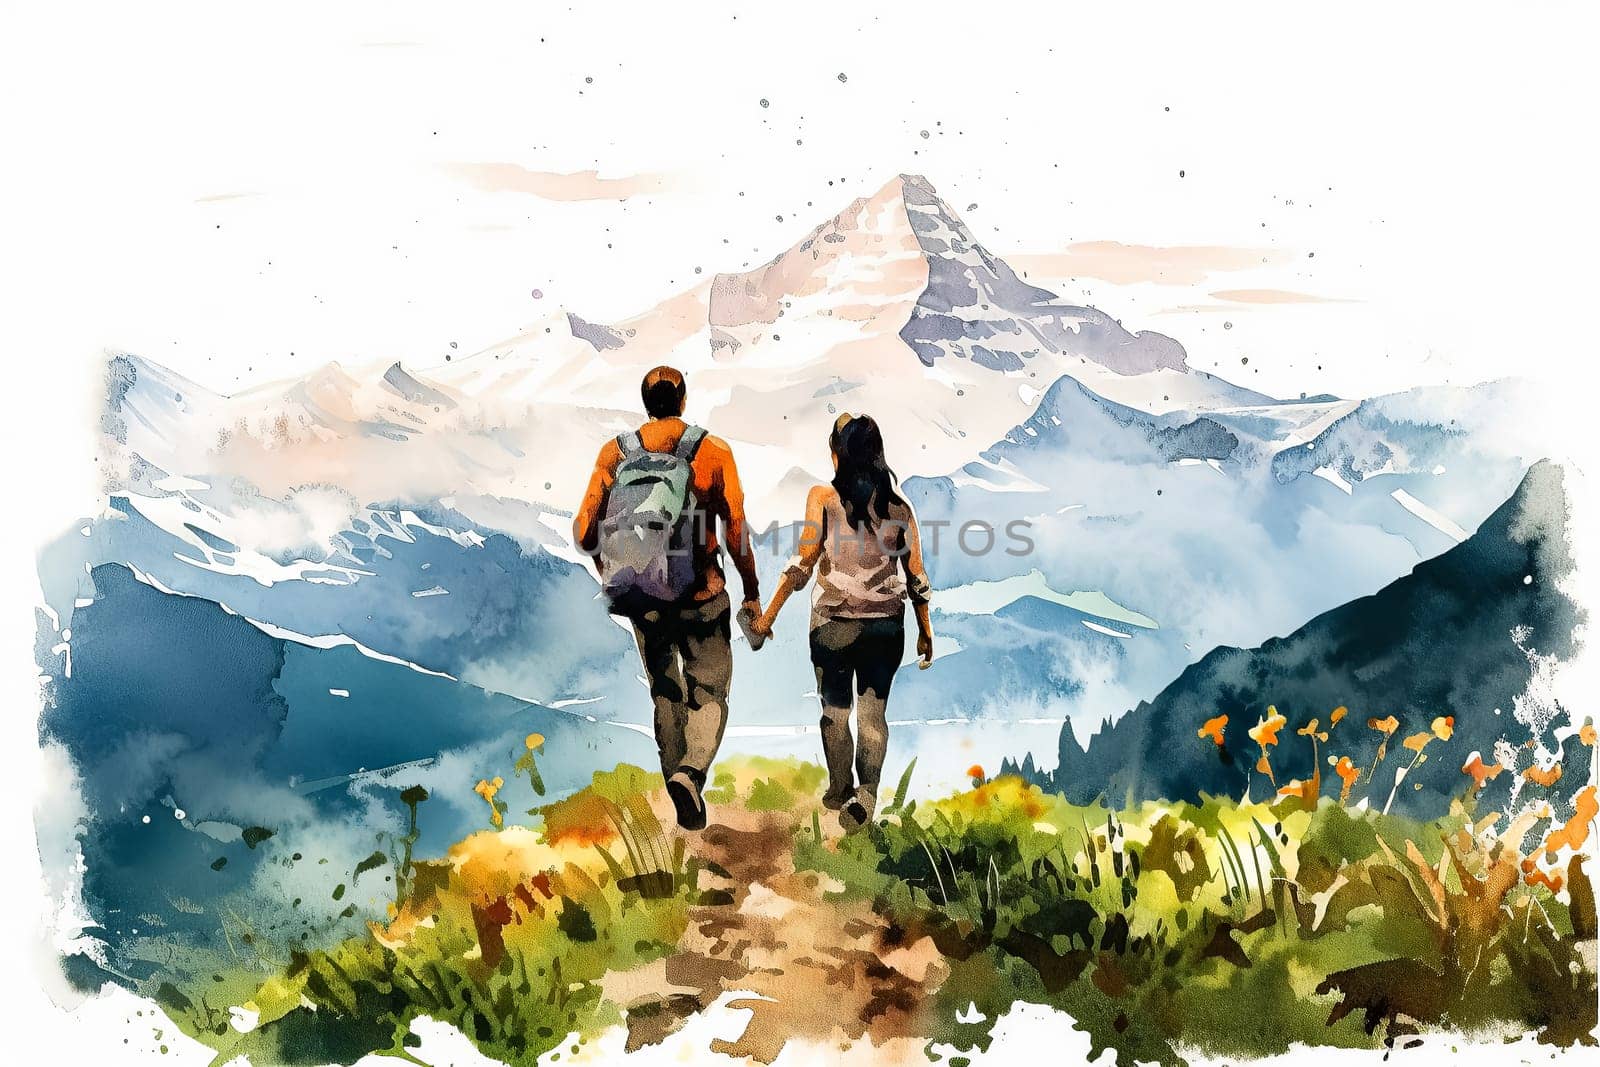 Experience the serenity of love with a watercolor illustration depicting a couple in the mountains. by Alla_Morozova93